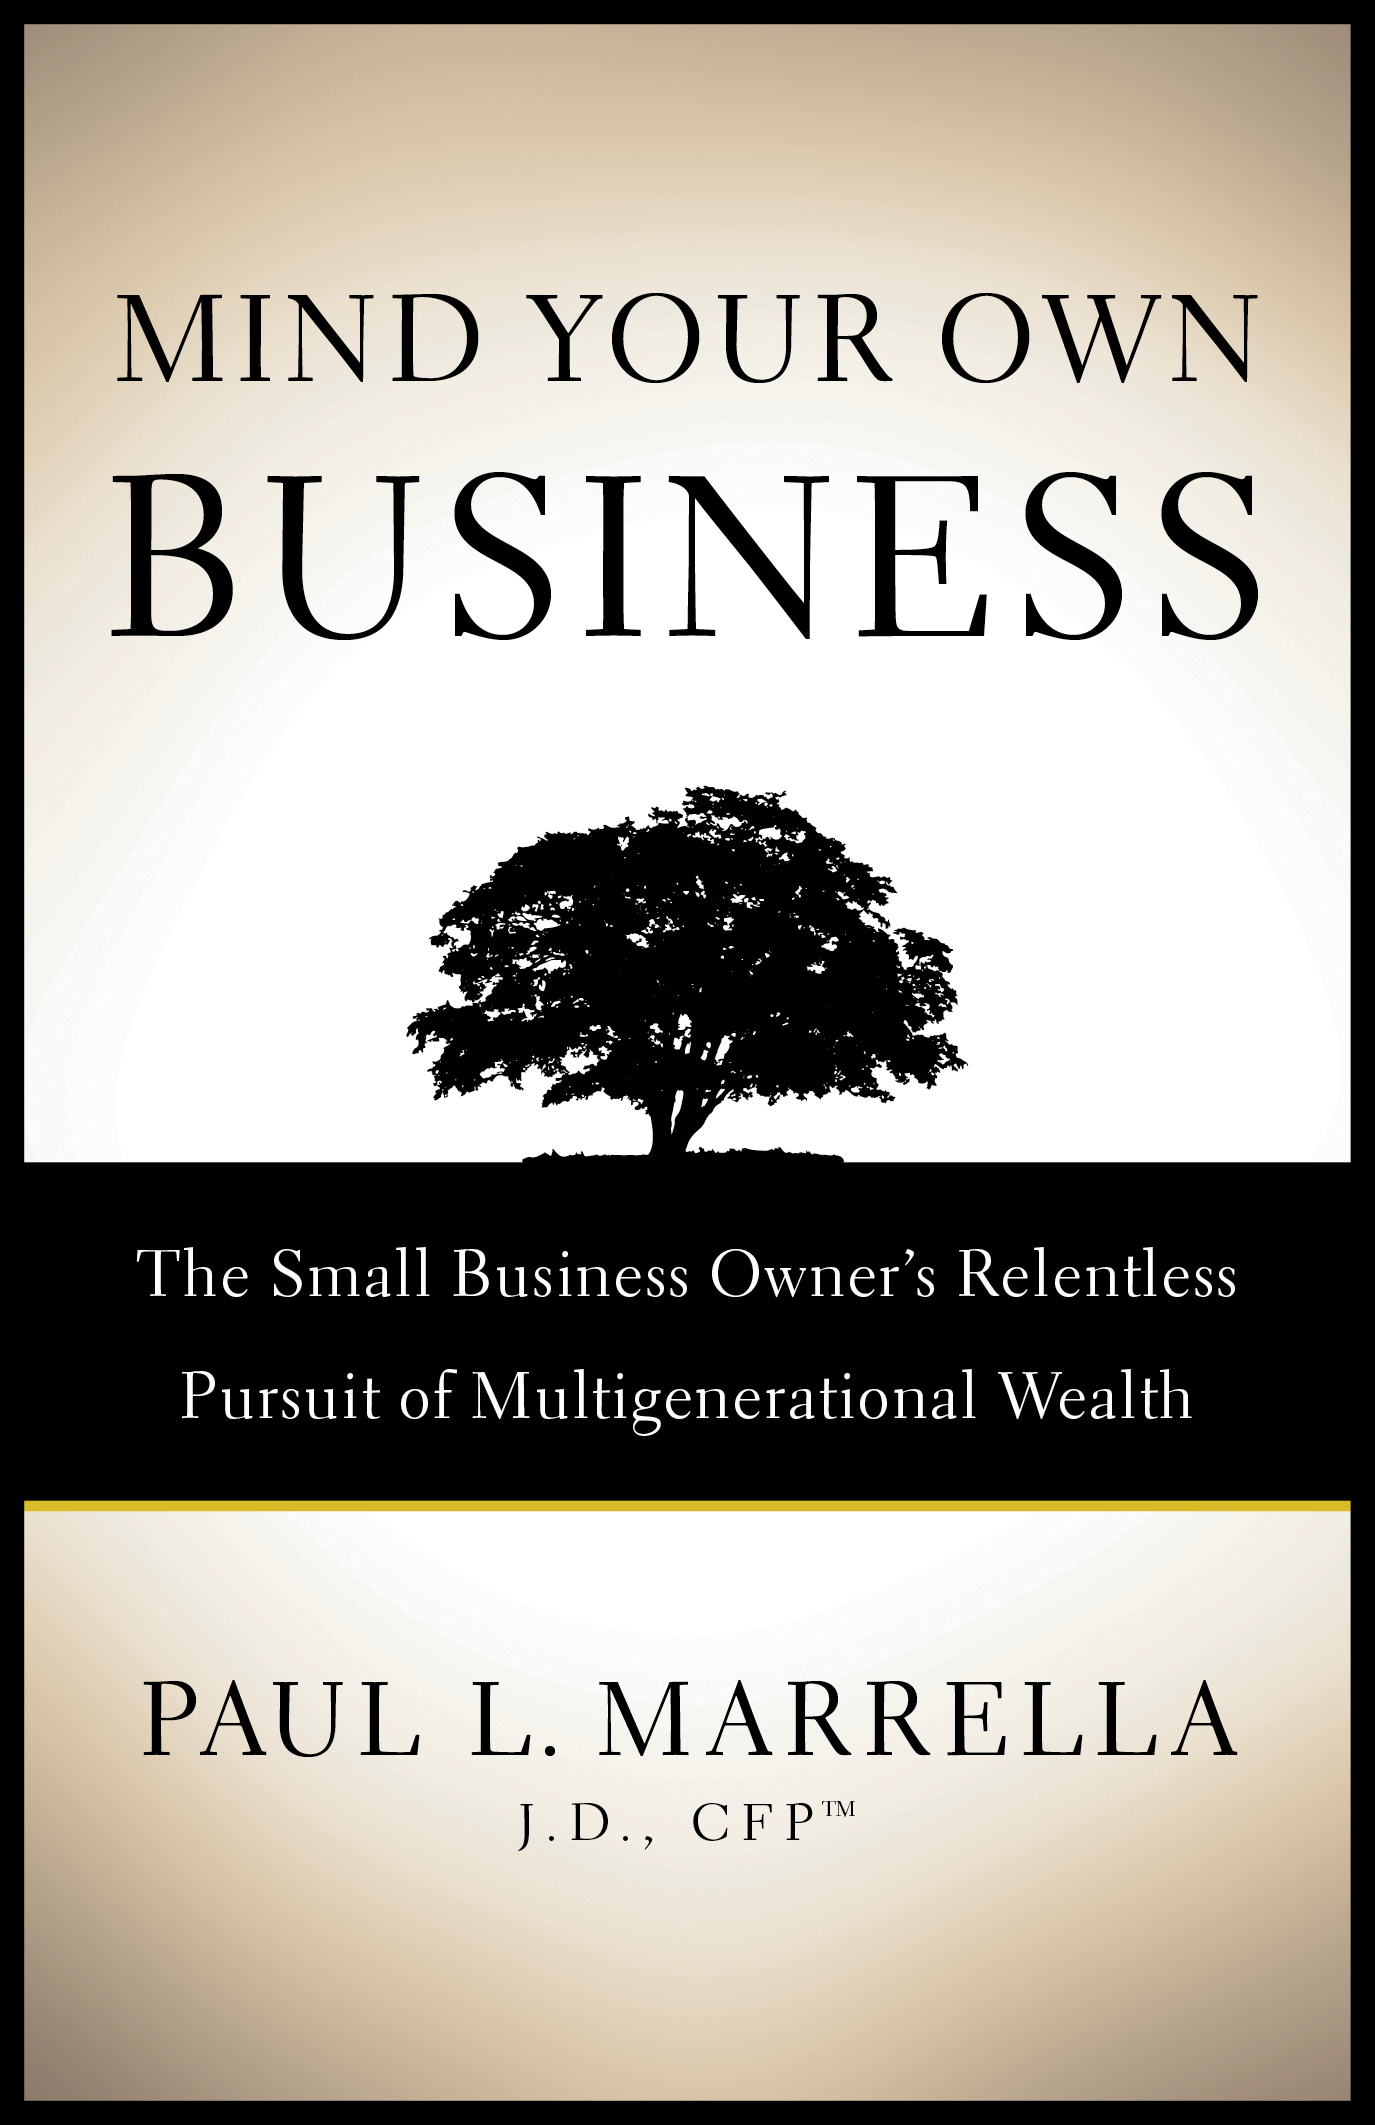 Mind Your Own Business: The Small Business Owner’s Relentless Pursuit of Multigenerational Wealth